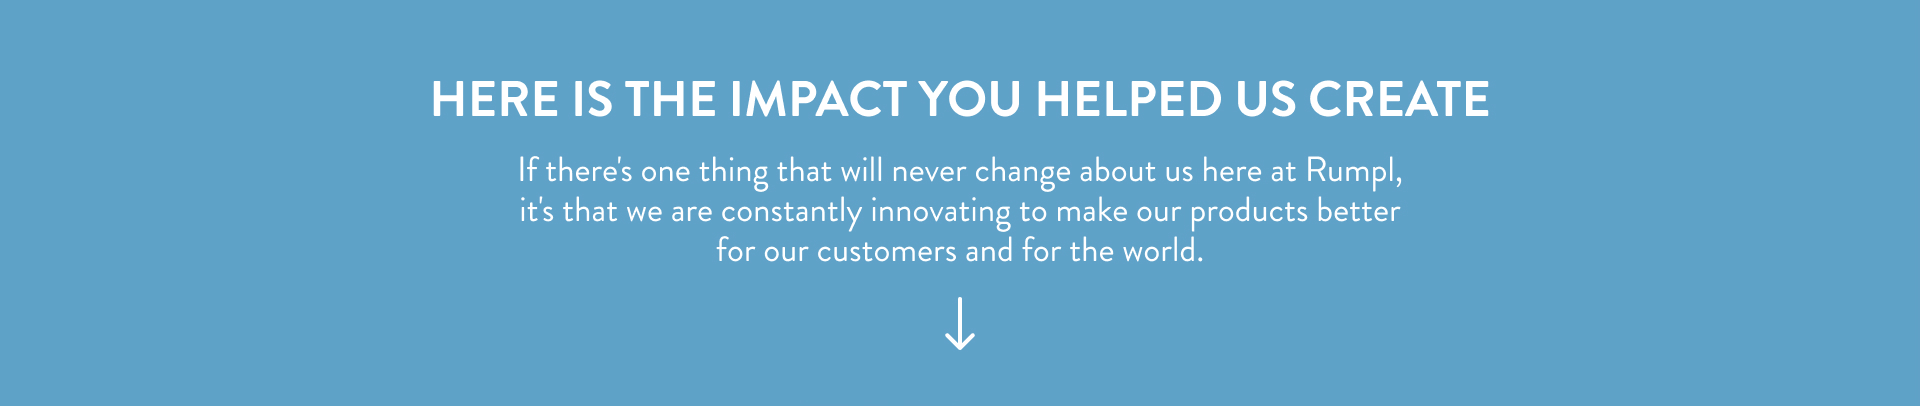 Here is the Impact you Helped us Create.